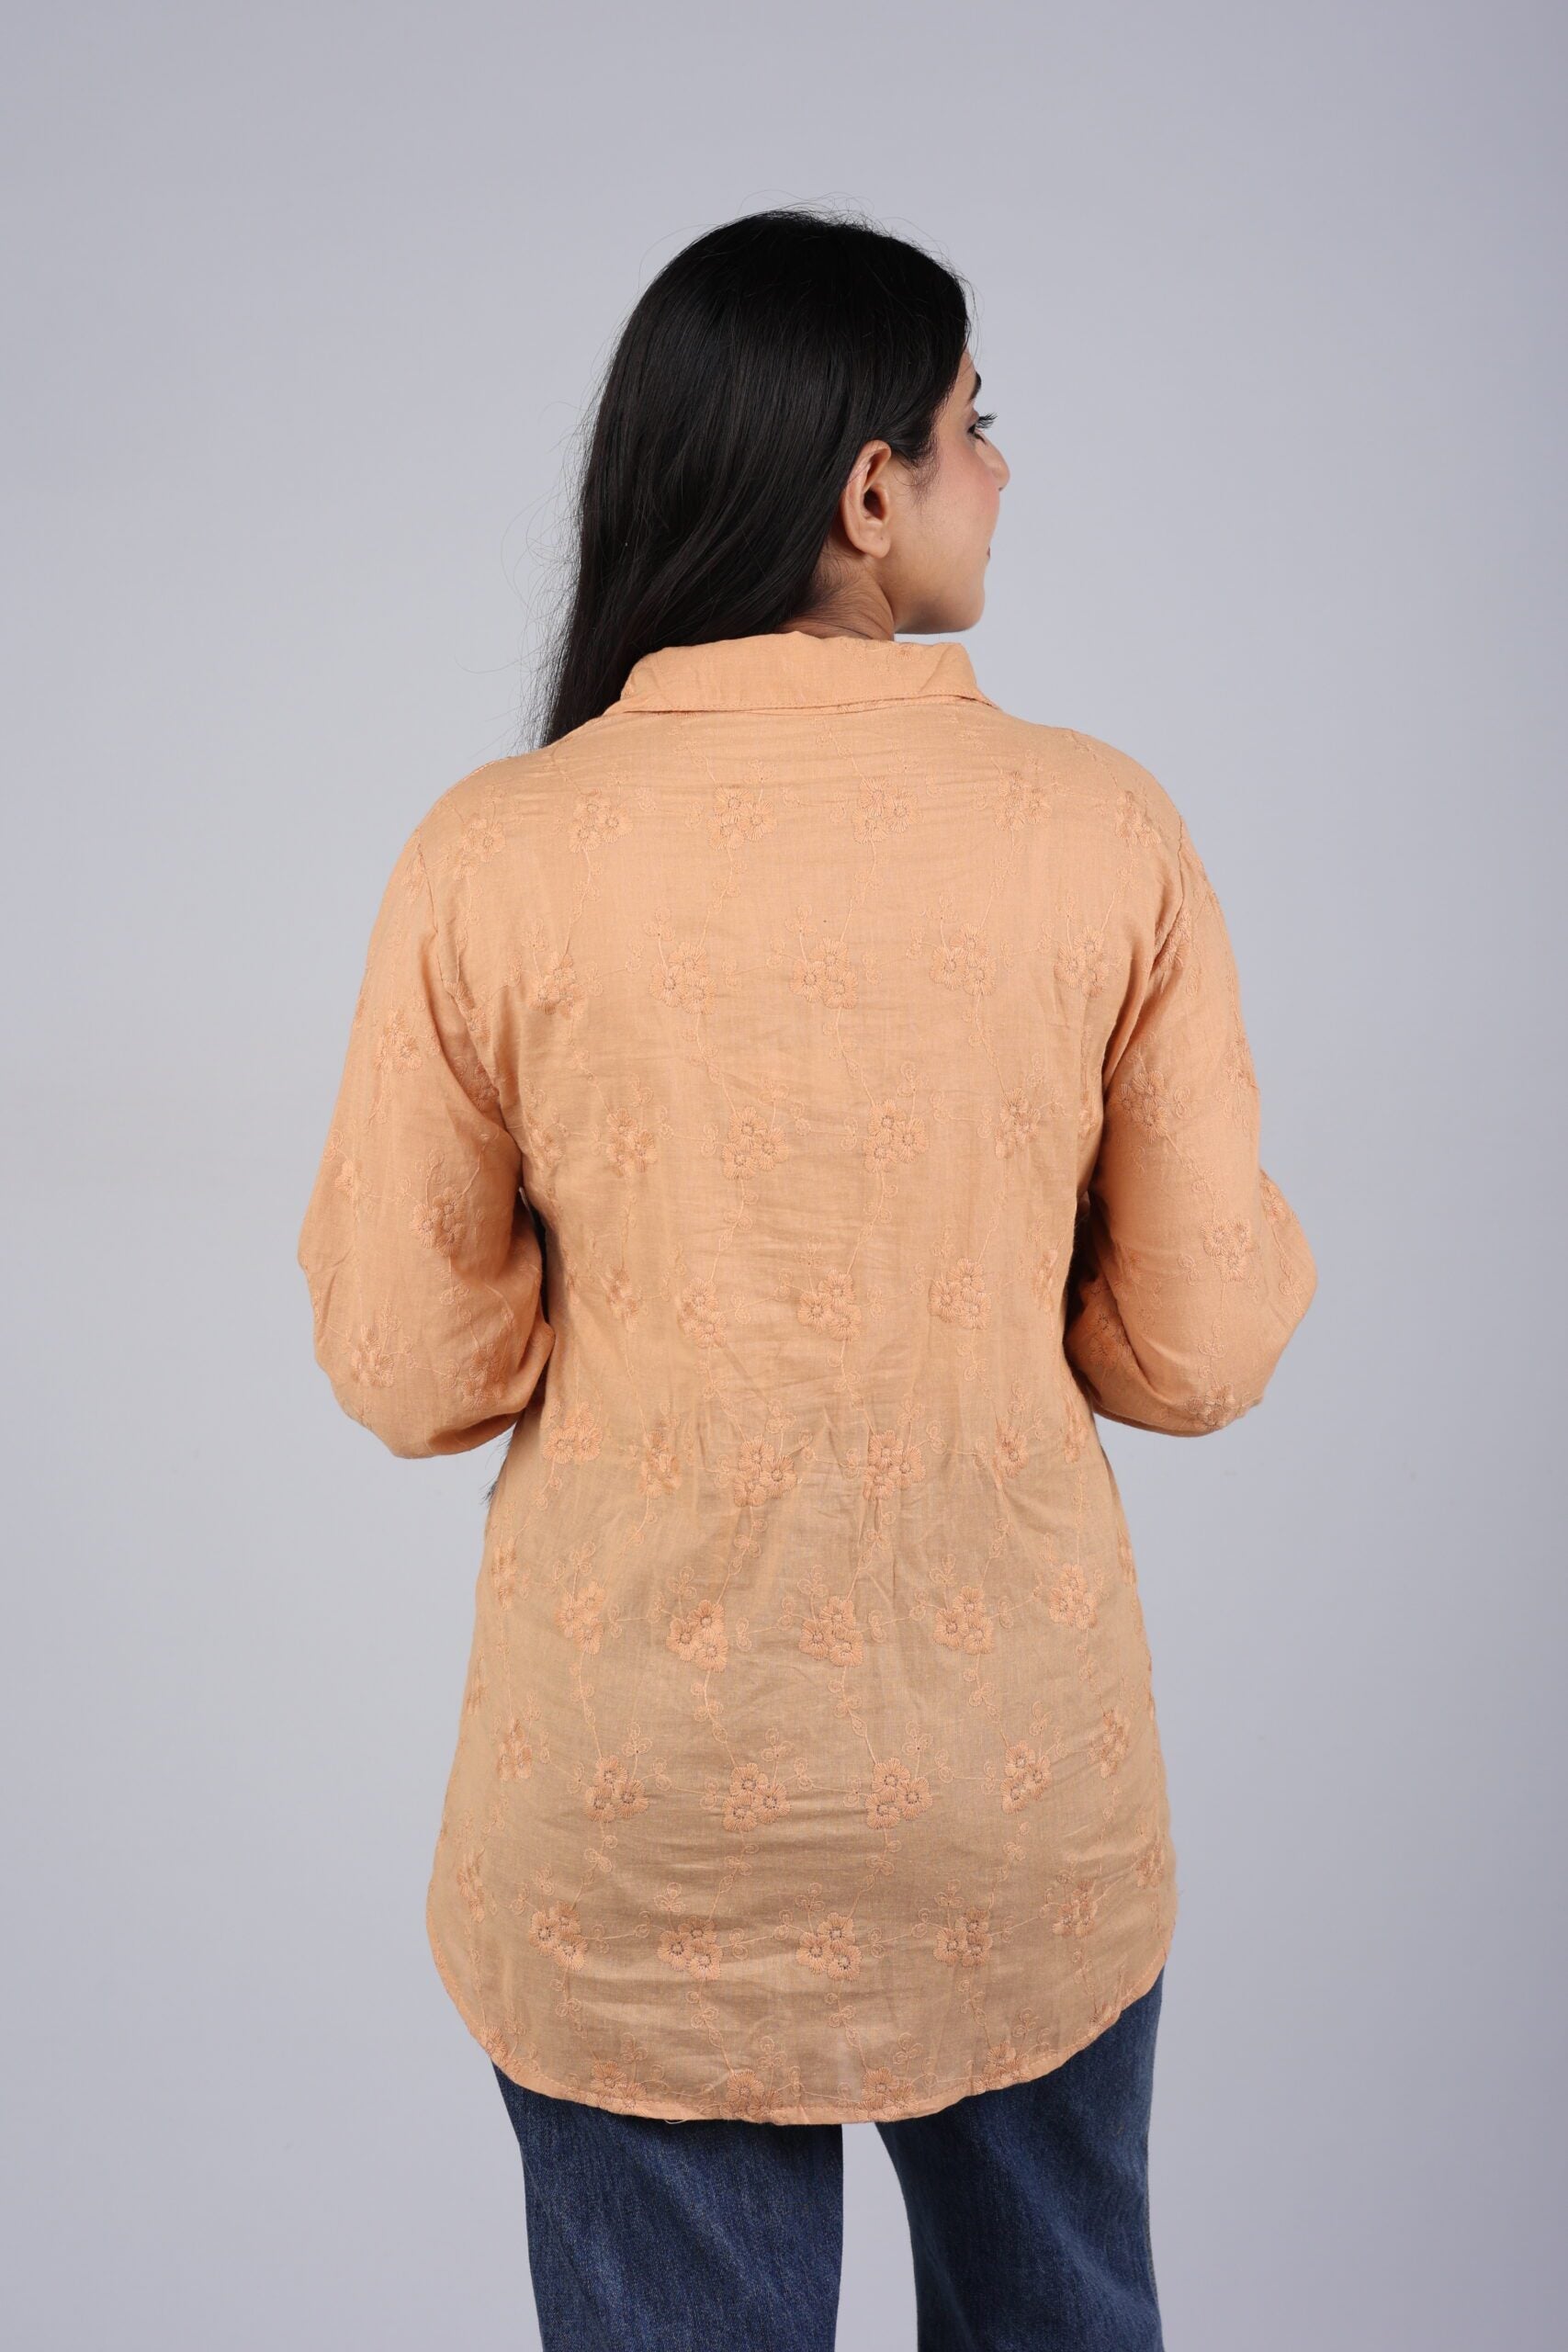 Pocketed Chicken Shirt  Top (Coffee) A Perfect Blend of Comfort and Style!